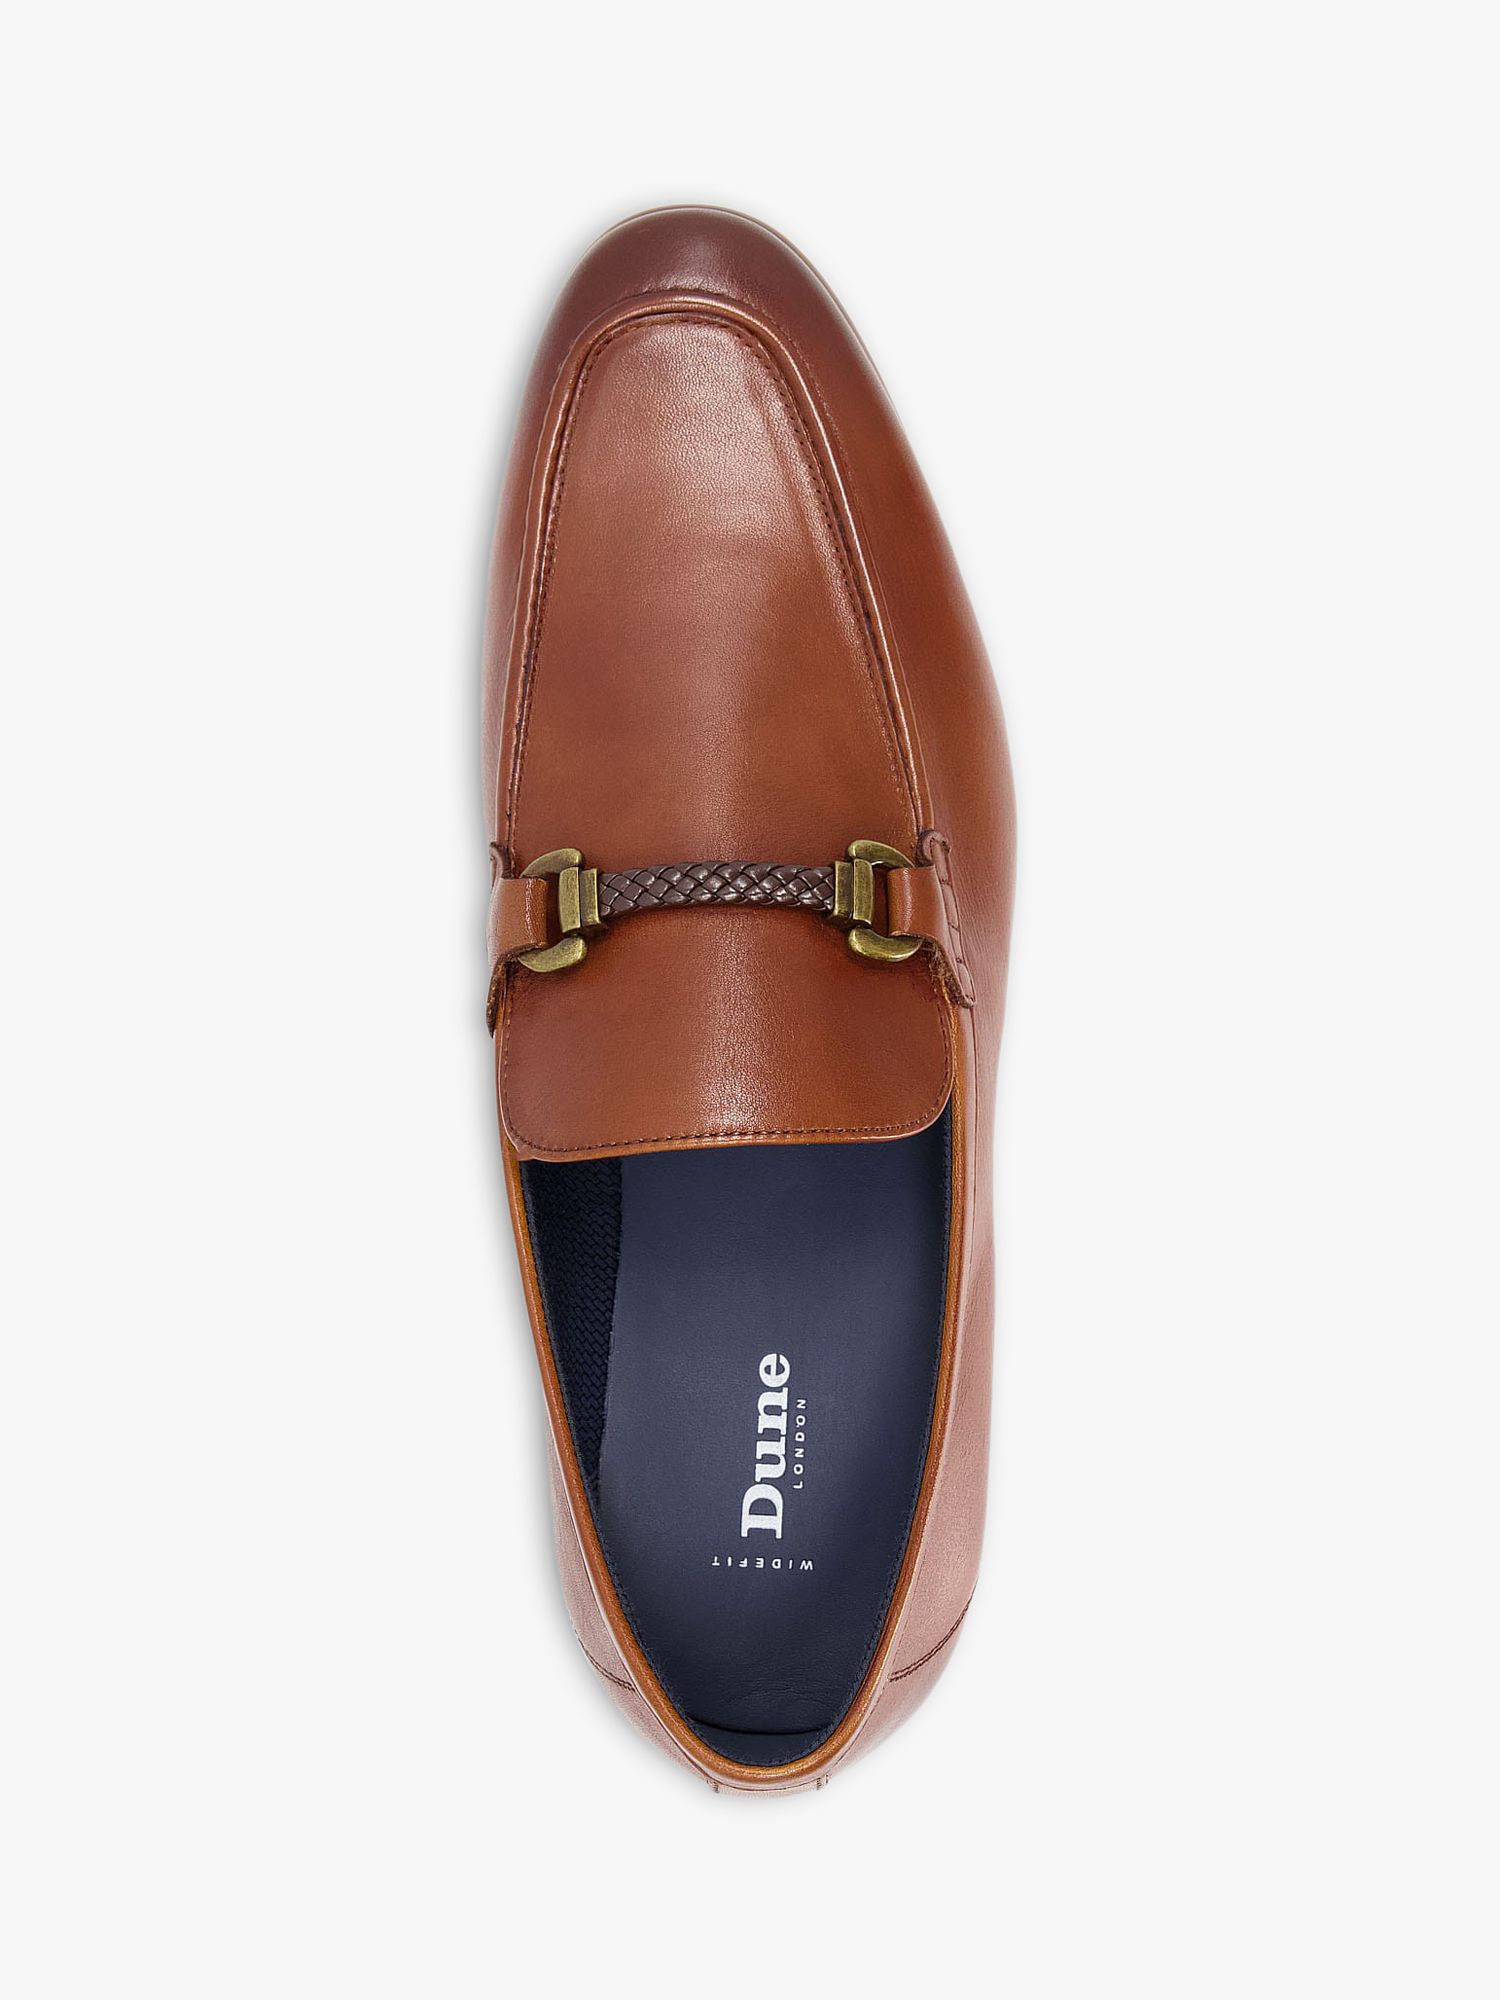 Dune Santino Wide Fit Woven Trim Leather Loafers, Tan at John Lewis ...